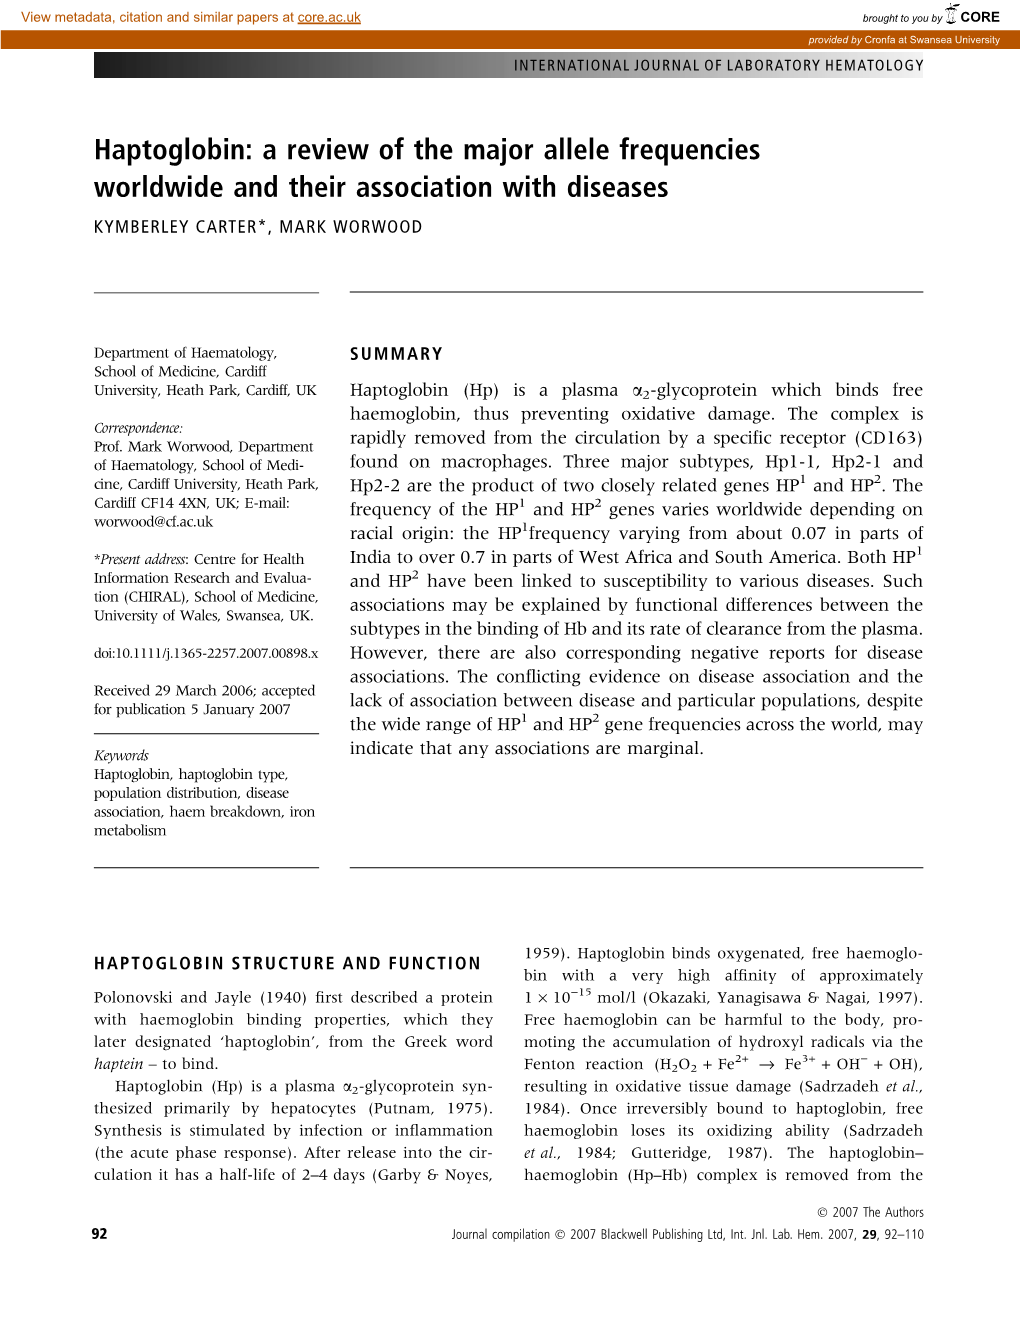 Haptoglobin: a Review of the Major Allele Frequencies Worldwide and Their Association with Diseases KYMBERLEY CARTER*, MARK WORWOOD